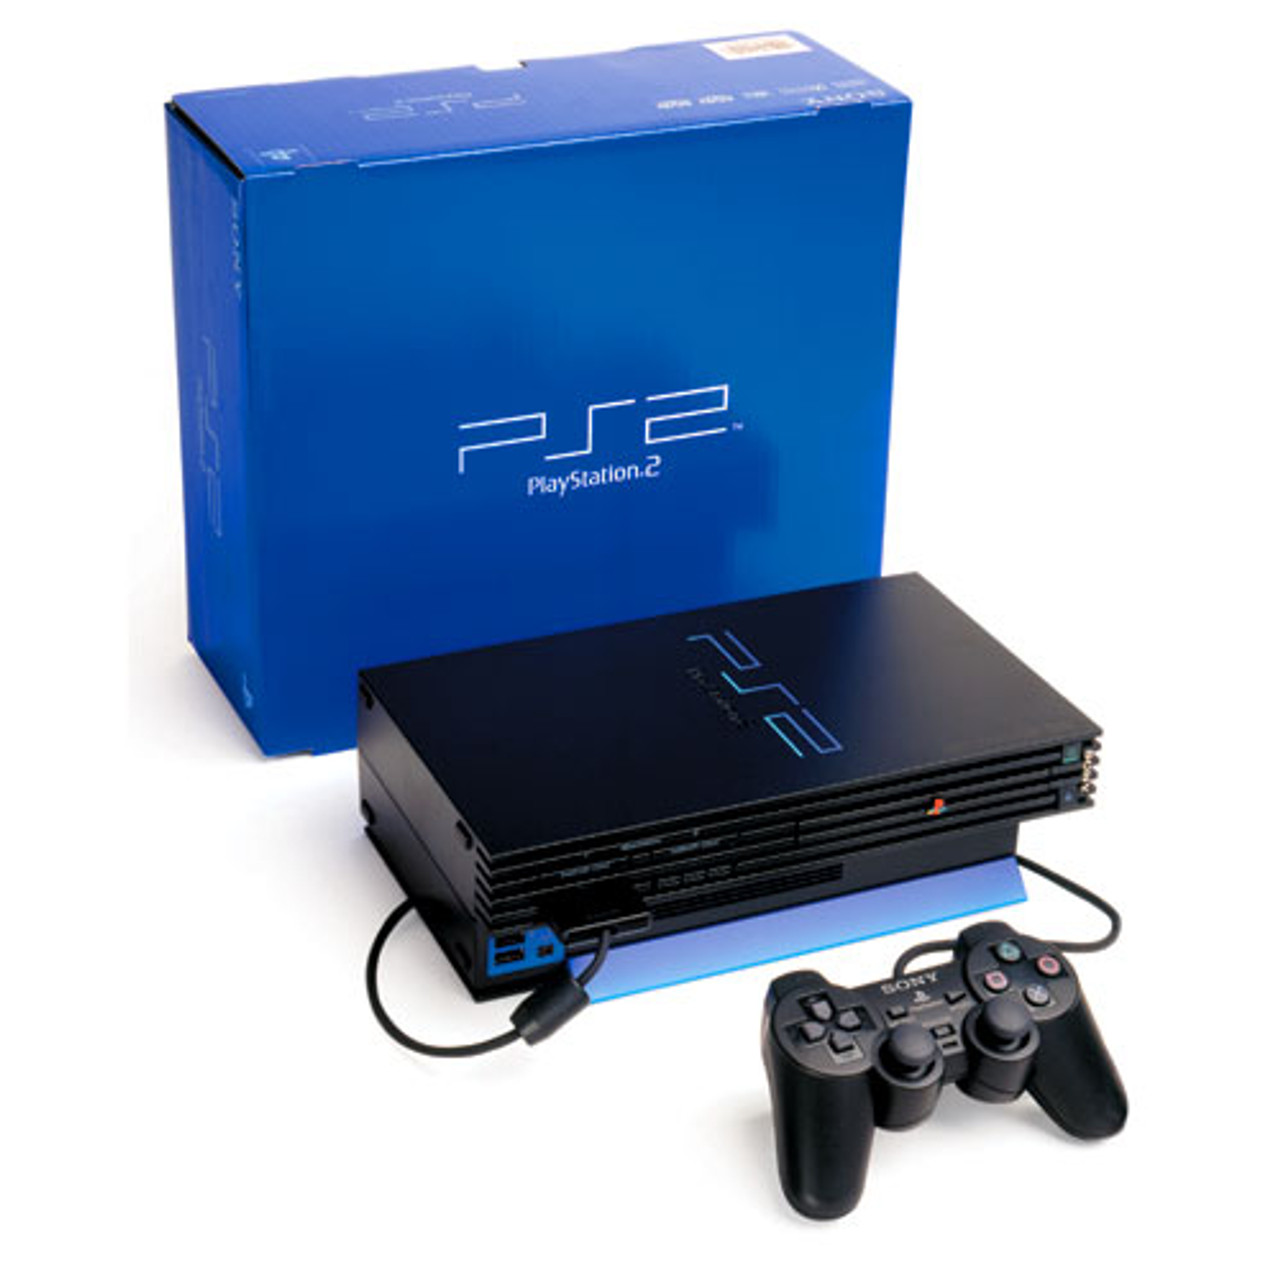 Used Sony Playstation 2 PS2 Slim Silver Refurbished System Console For Sale